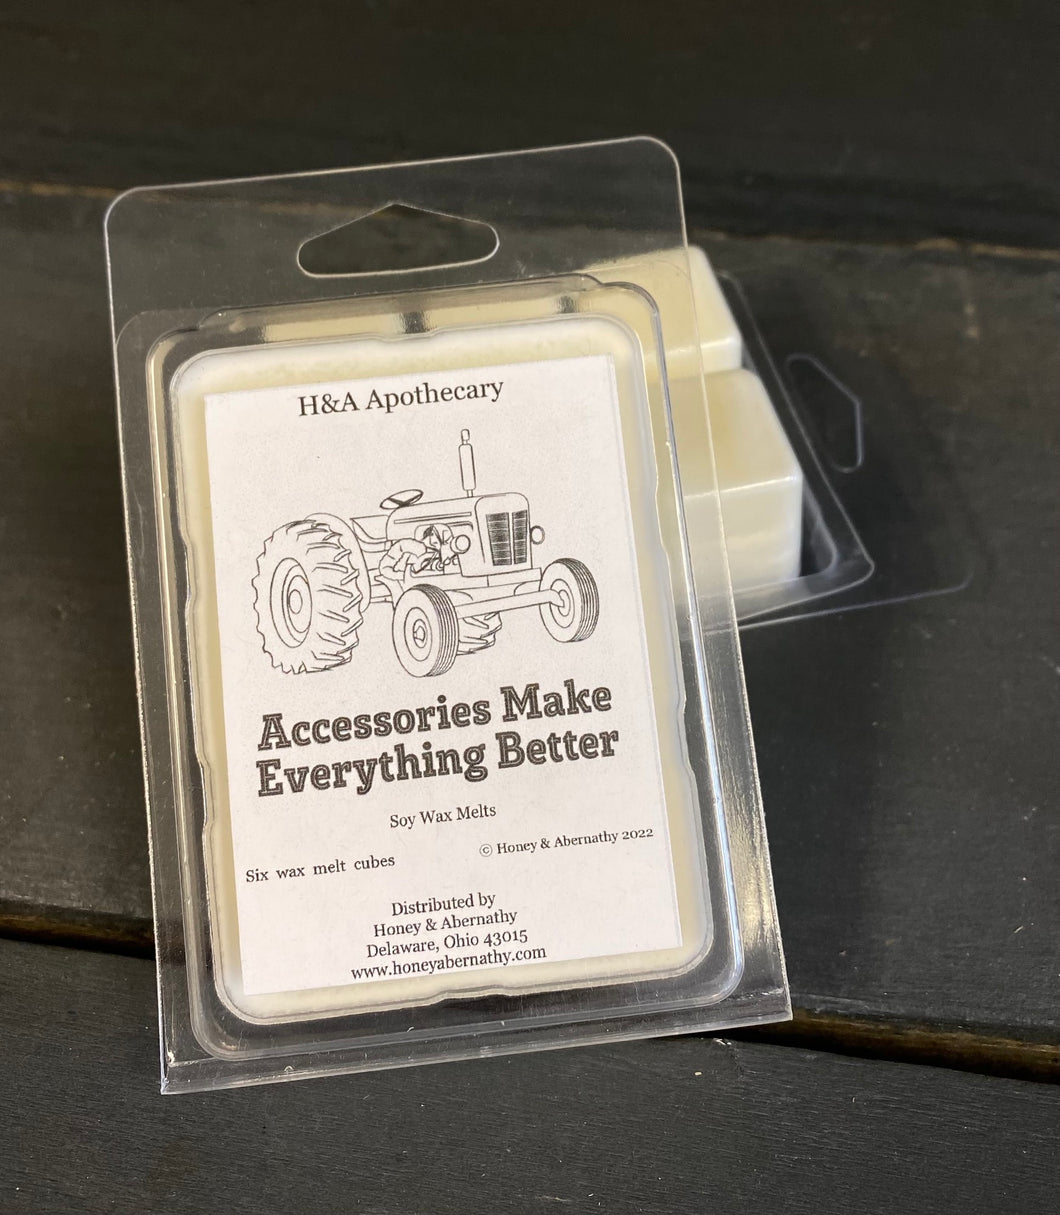 H&A Apothecary Accessories Make Everything Better Soy Wax Melt